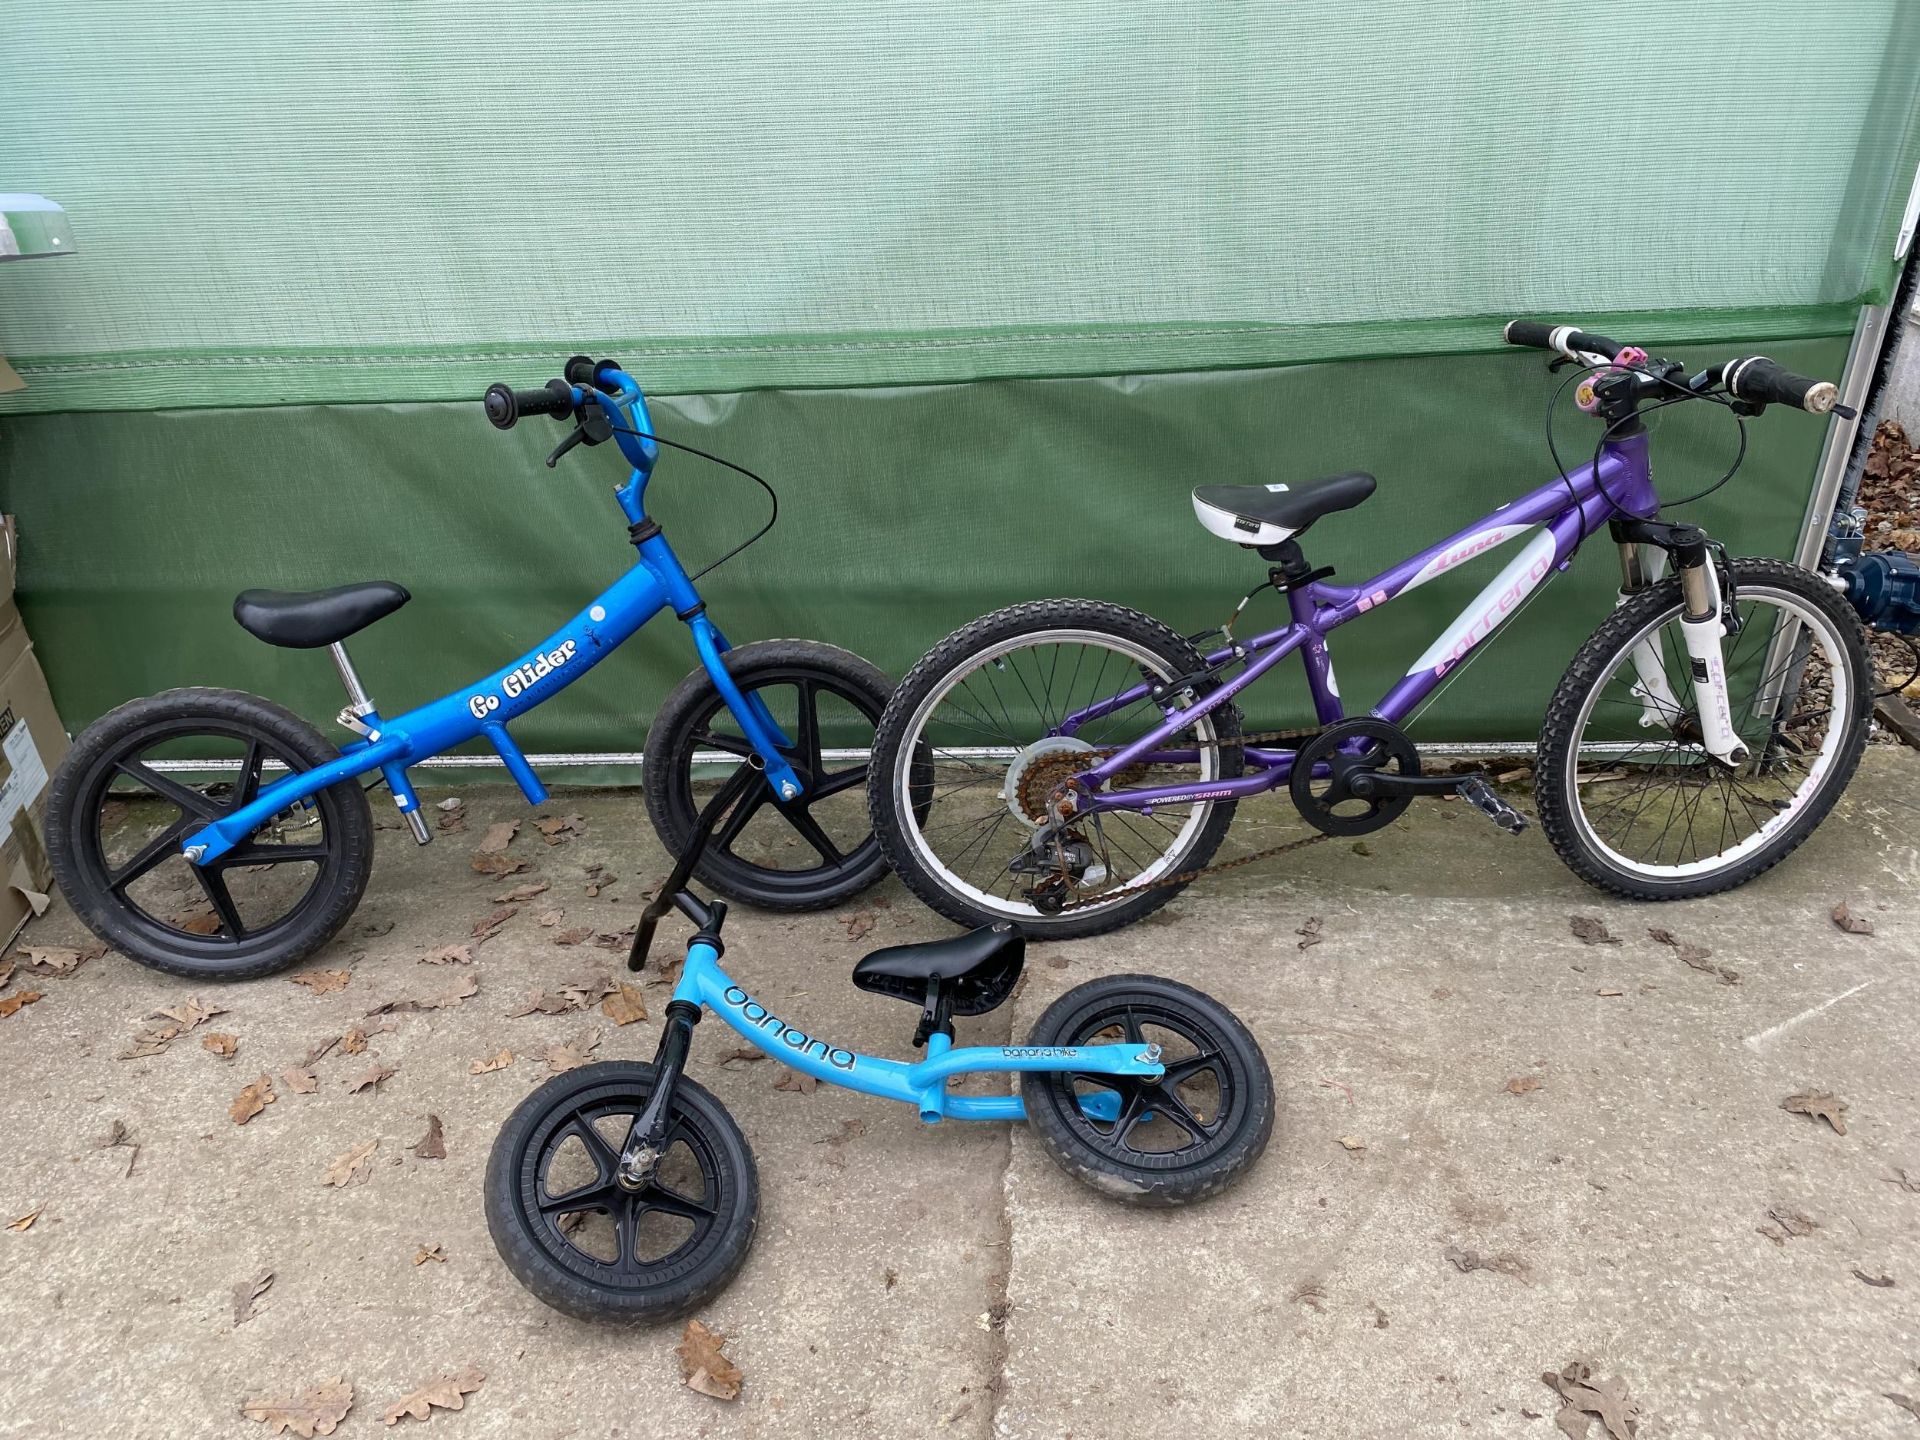 THREE CHILDRENS BIKES TO INCLUDE TWO BALANCE BIKES AND A CARRERA LUNA GIRLS BIKE WITH 7 SPEED GEAR